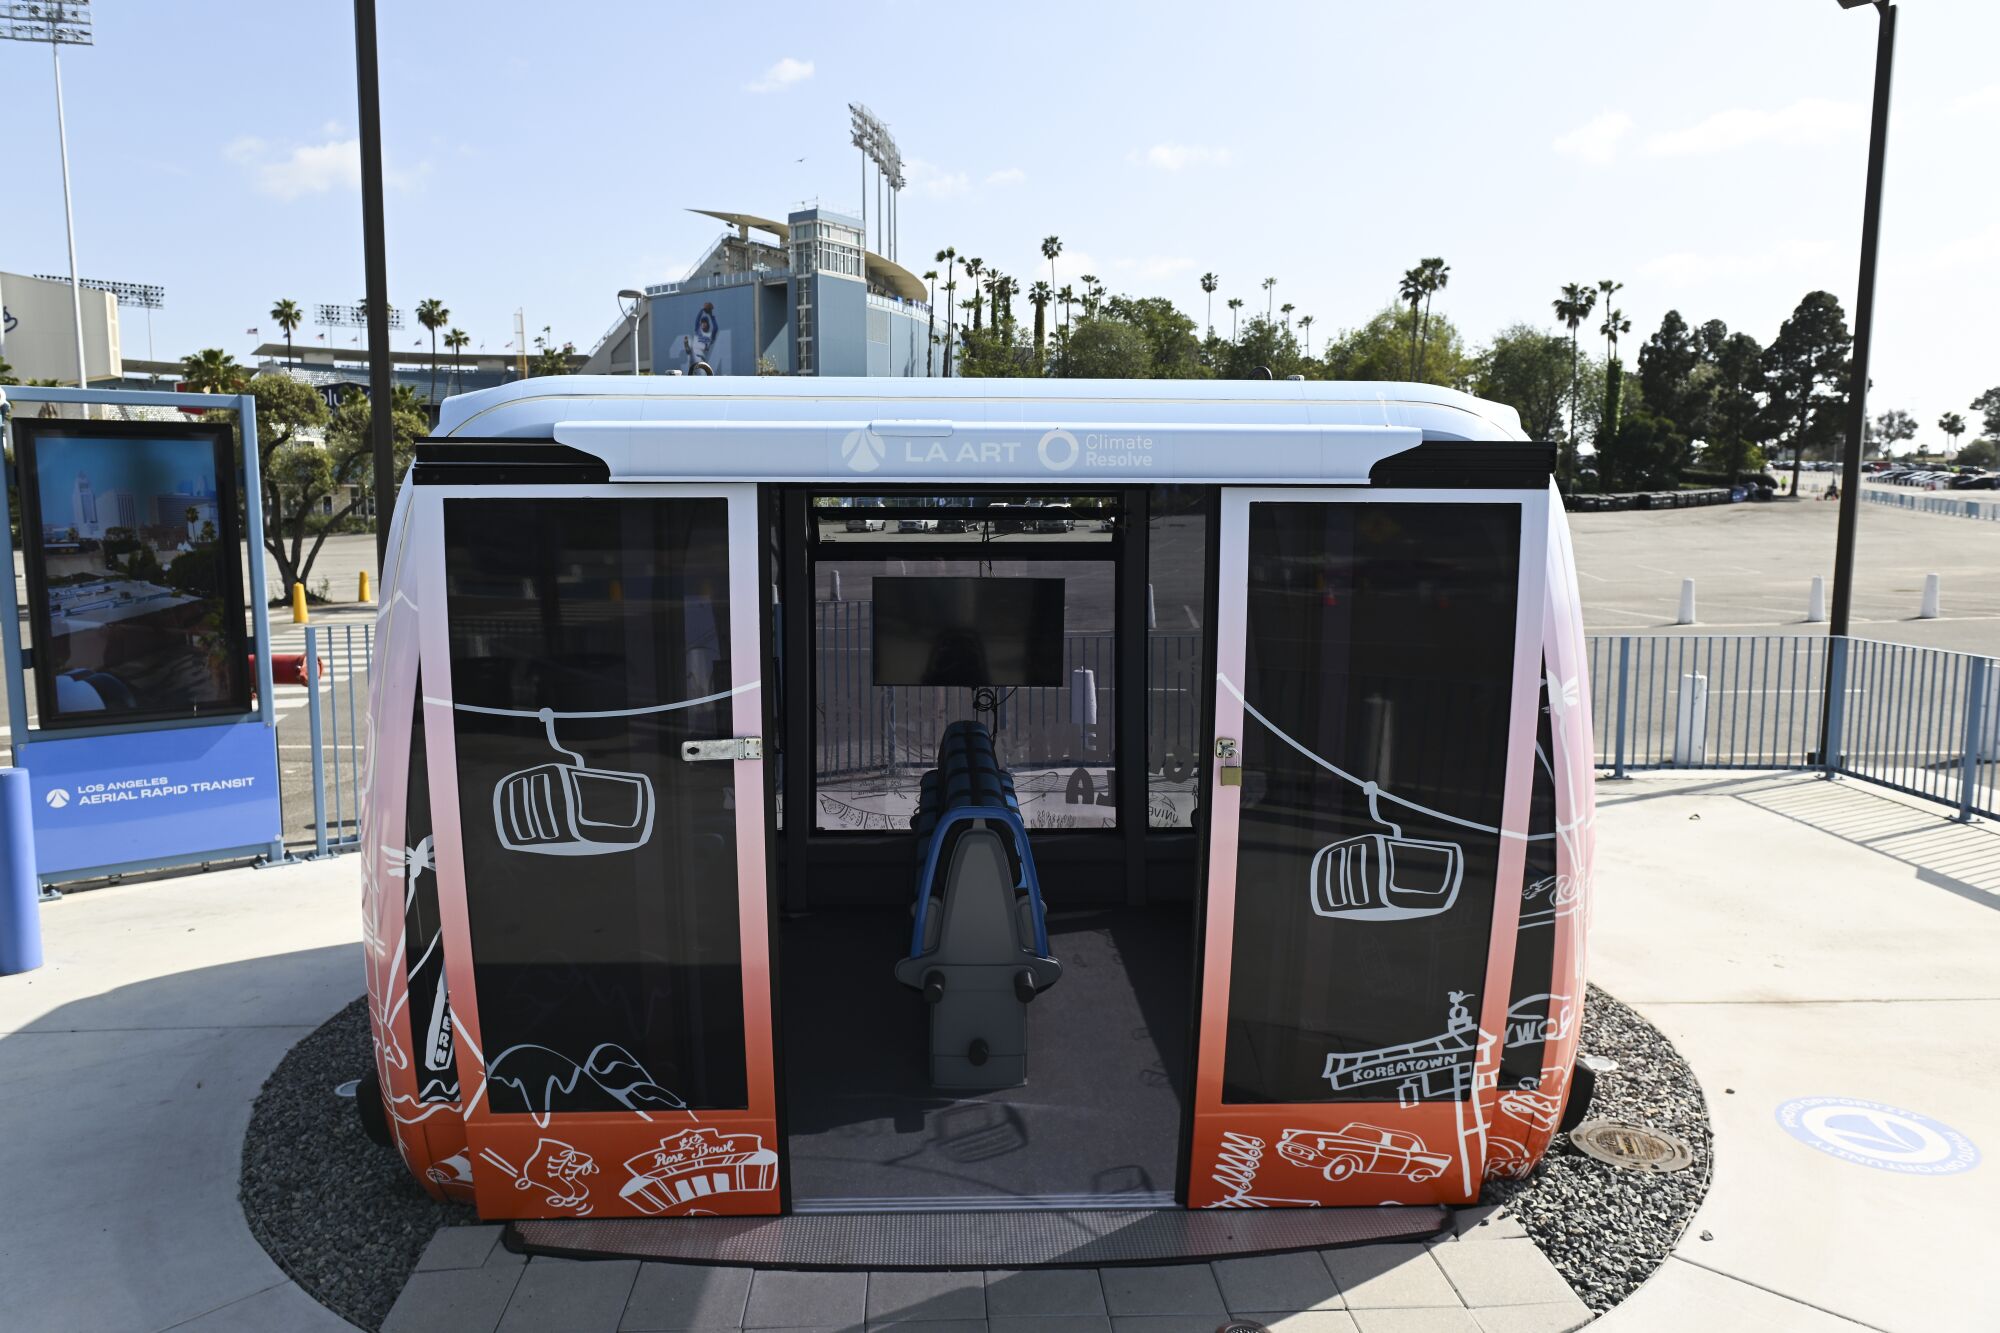  Gondola cabin on display in the Dodger Stadium parking lot on Tuesday, April 18, 2023 in Los Angeles, CA